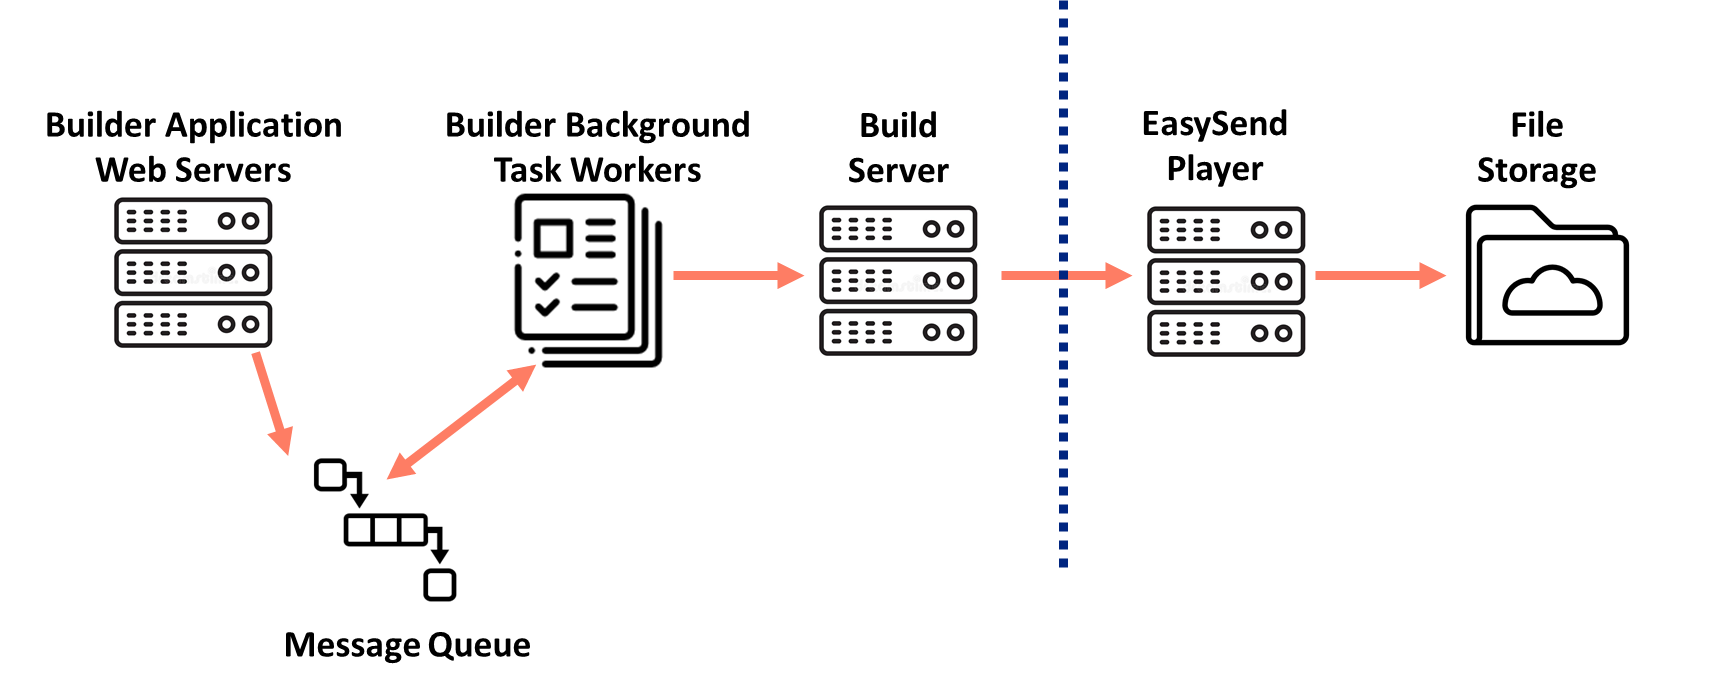 The deployment process uses an additional set of services and follows these steps:  EasySend Web Server triggers a background task to initiate deployment, sent as a message on the message queue. The message is handled by one of the background task workers in the builder. The background task worker packages all the required resources into a zip archive, digitally signs it, and sends it to a Build server. The build server verifies signature validity, unpacks the zip archive, and performs additional build steps required for process deployments such as CSS asset construction, theme composition, and conditional and computed logic. The build server packs all assets back into a zip file, and digitally signs the package again. It then sends it to the relevant Player environment for deployment. The Player verifies the digital signature again, and upon successful verification, deploys the assets to a dedication location in an asset deployment bucket.